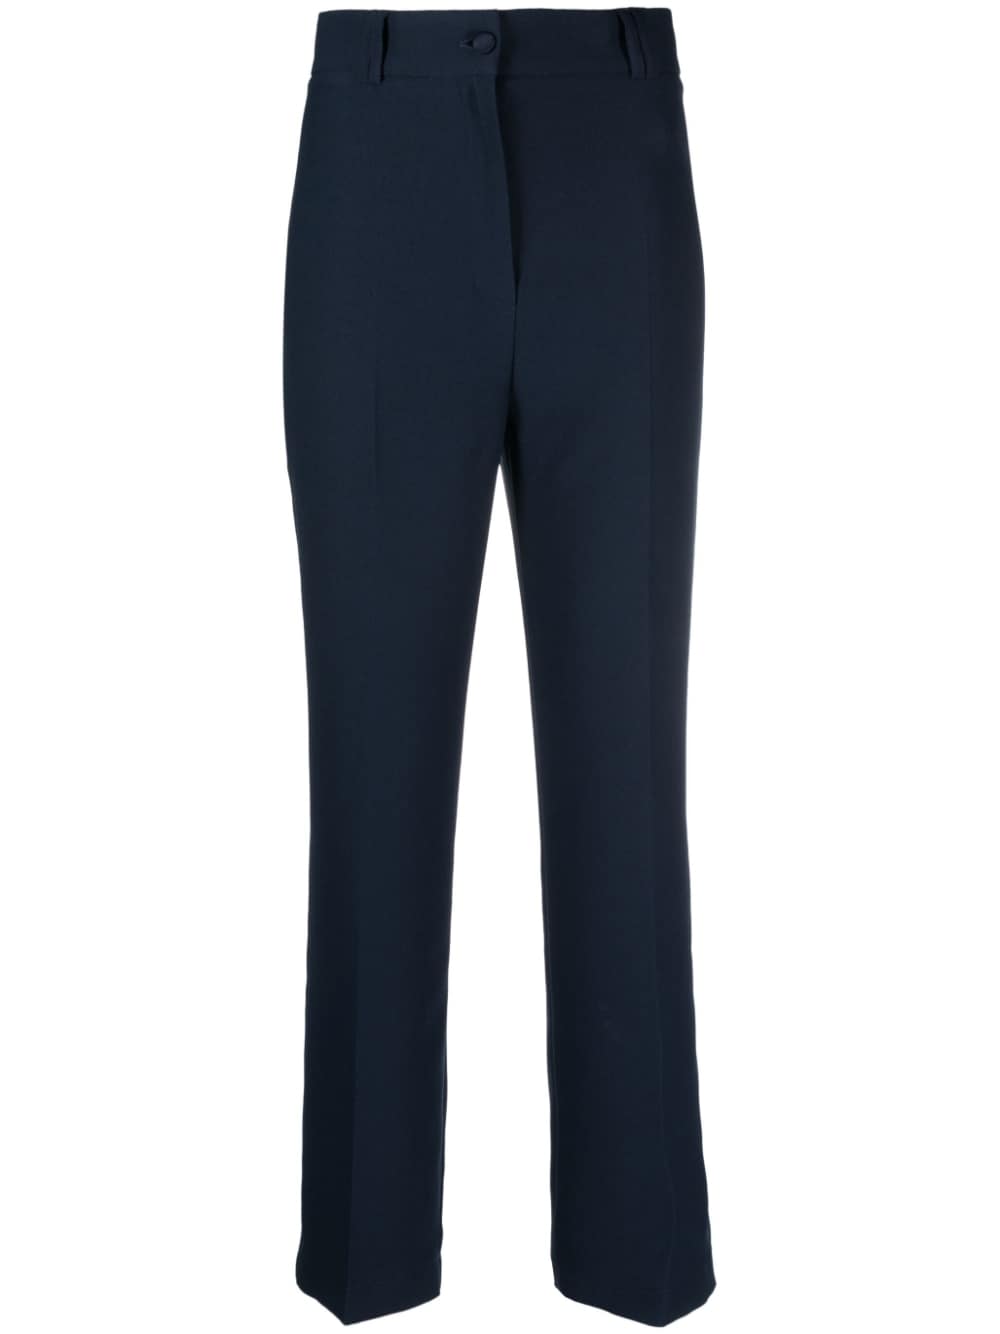 Hebe Studio HEBE STUDIO- The Classic Loulou Cady Trousers